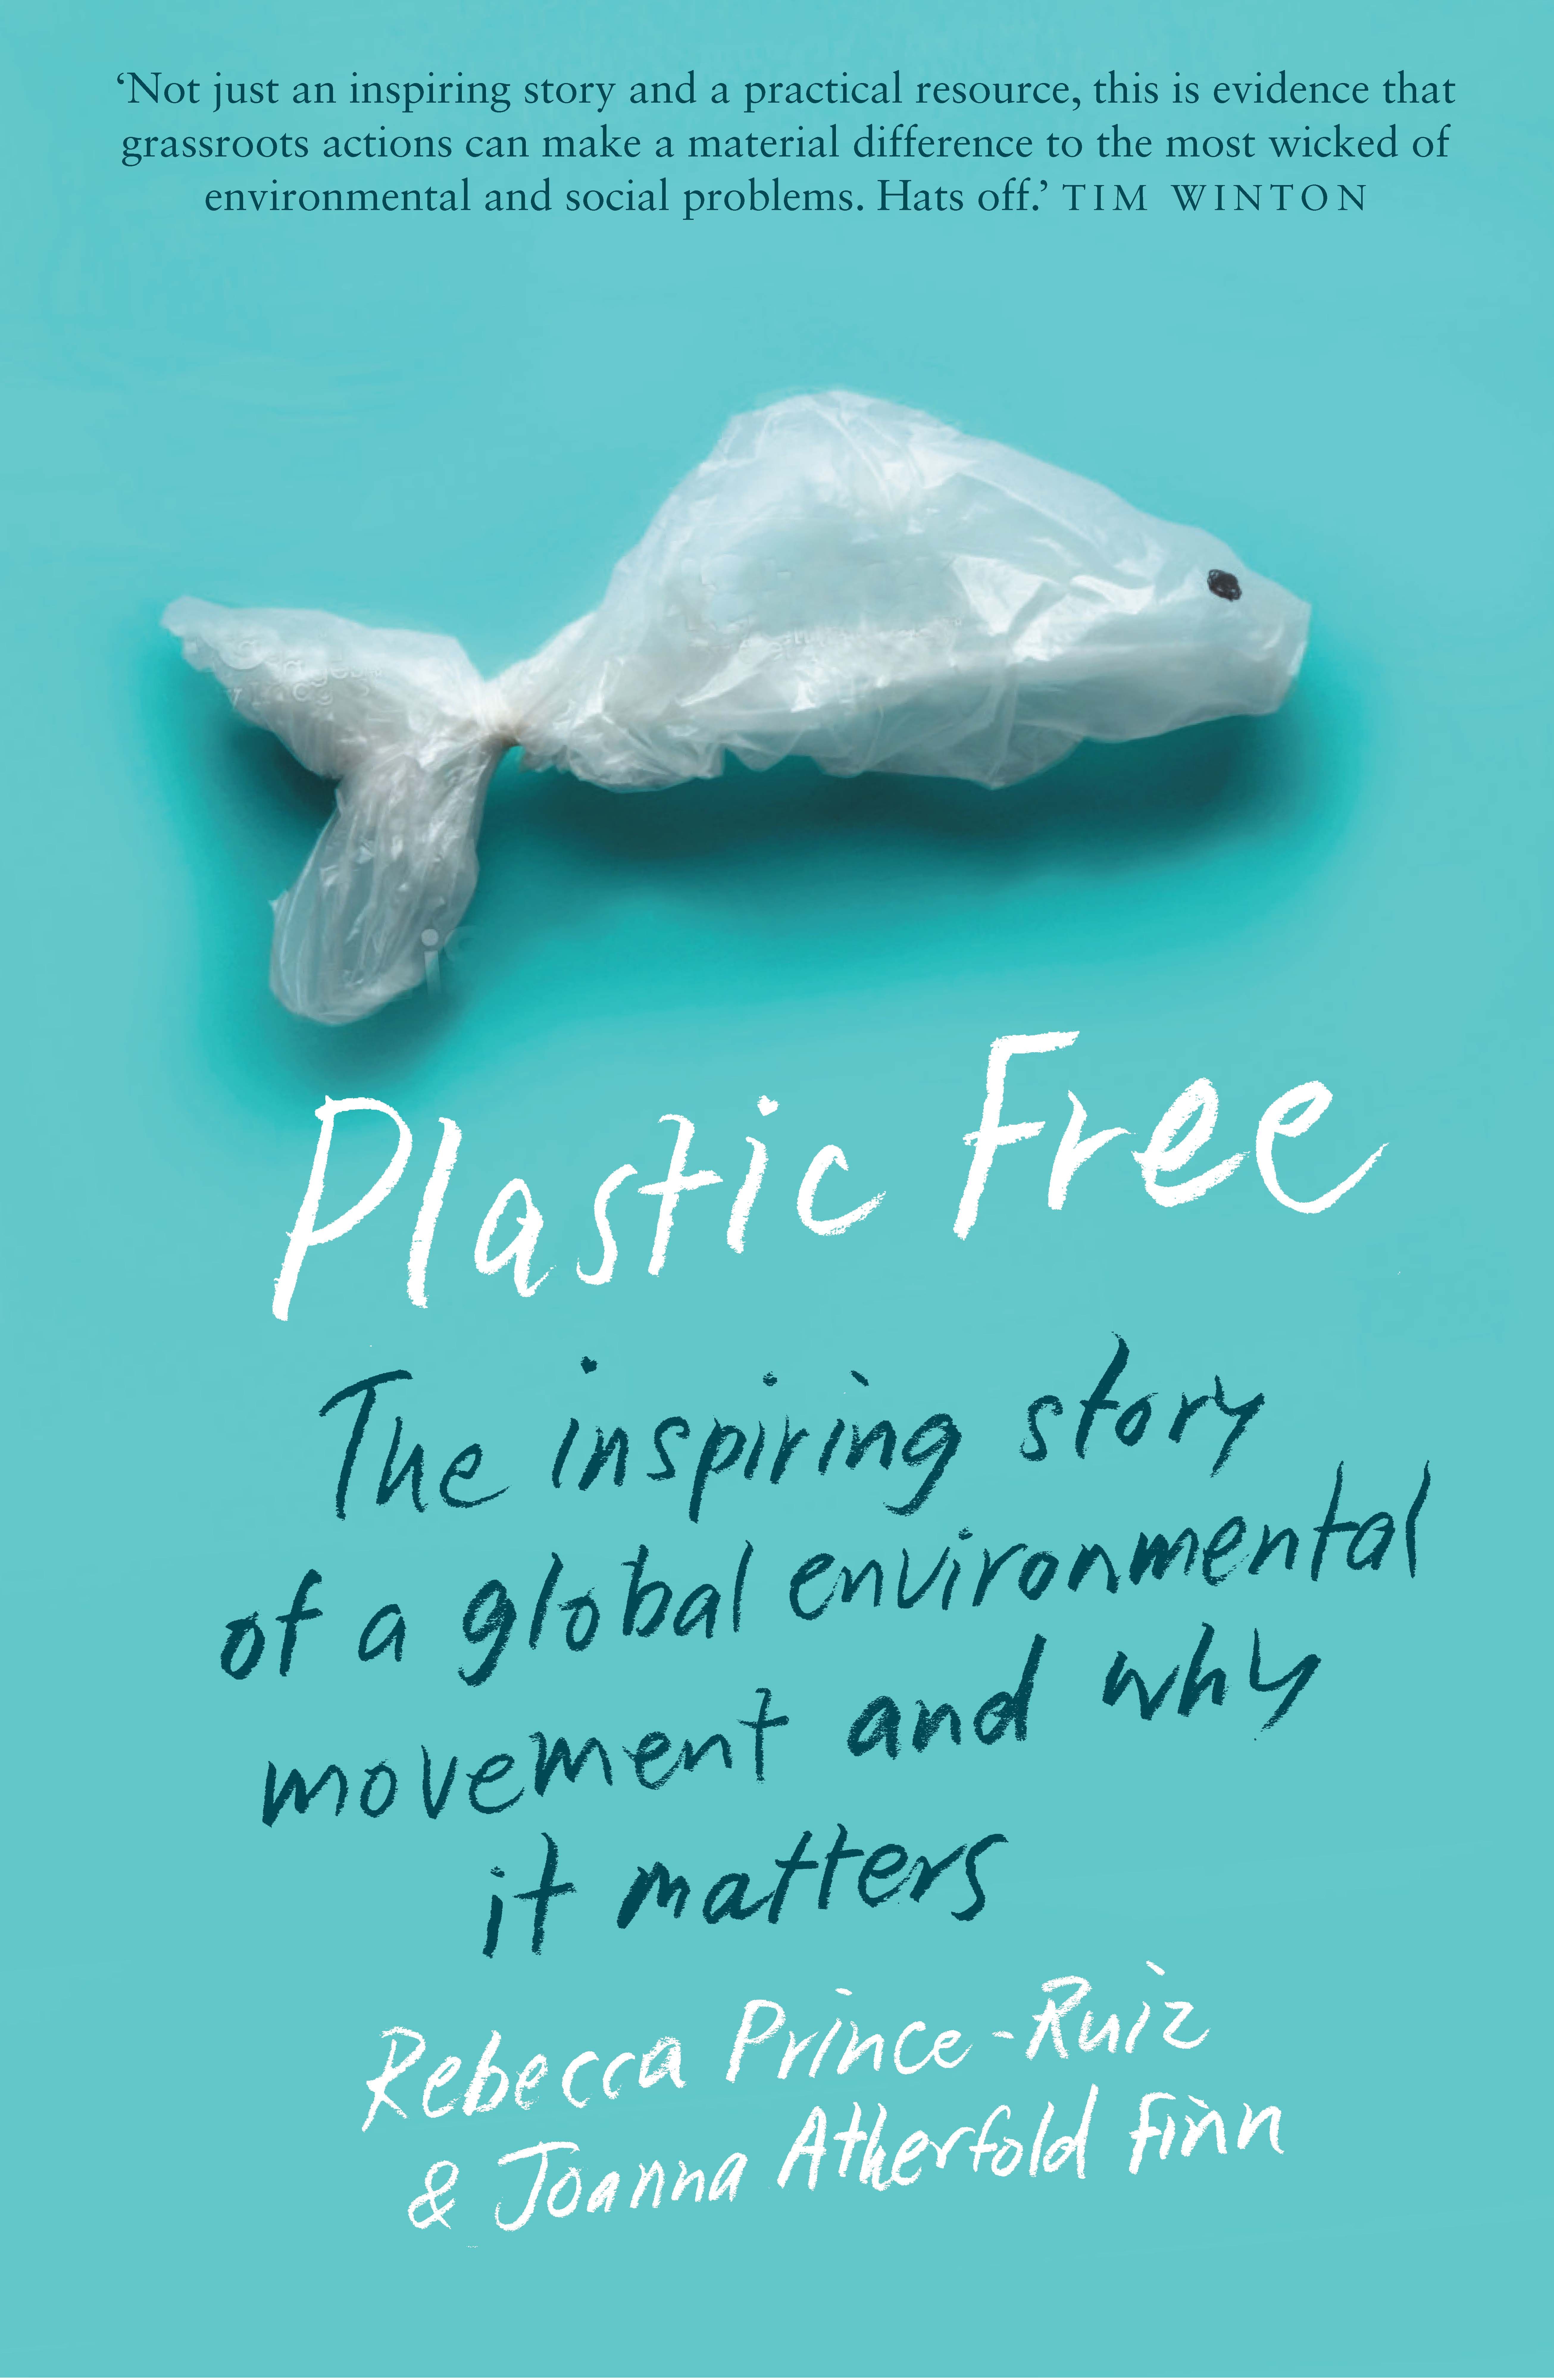 Plastic Free: The Inspiring Story of a Global Environmental Movement and Why It Matters by Rebecca Prince-Ruiz and Joanna Atherfold Finn